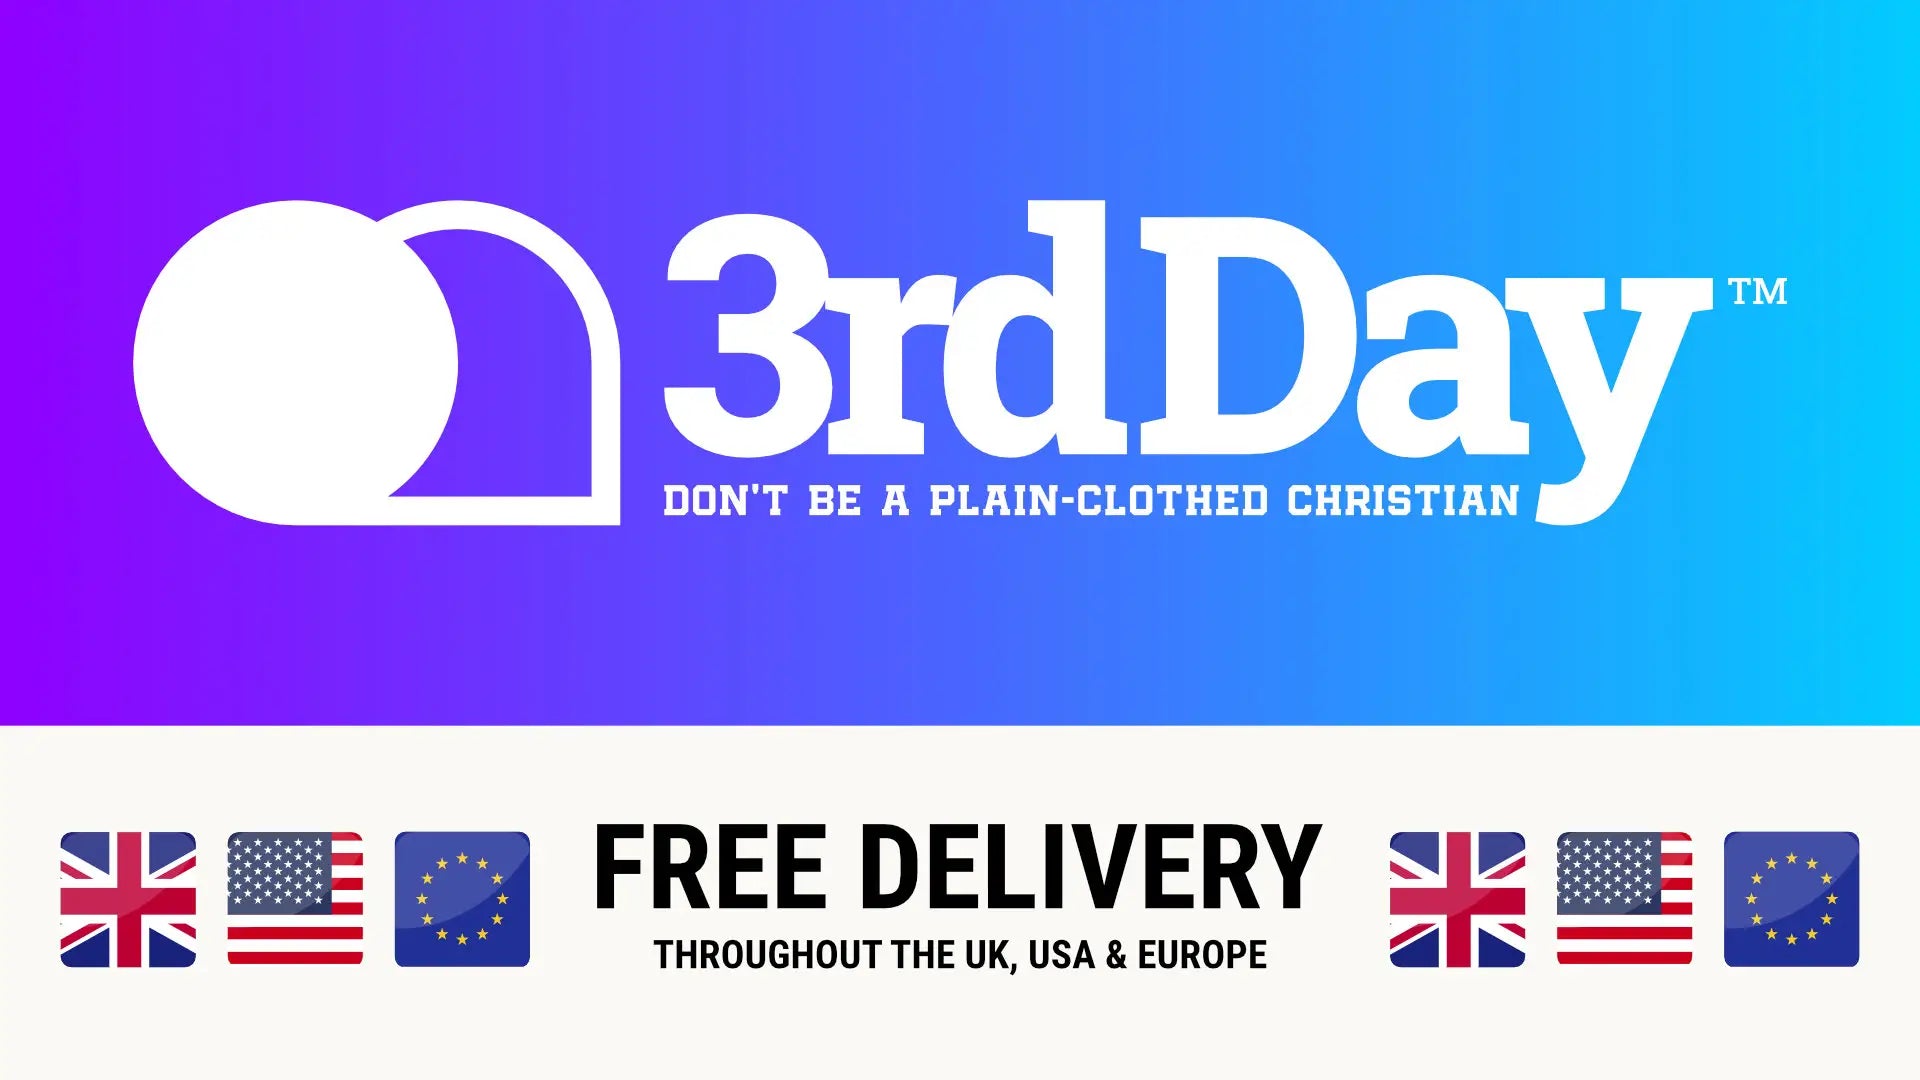 Load video: A showcase of several Christian T-shirts available at 3rd Day (The UK Christian Clothing Brand)